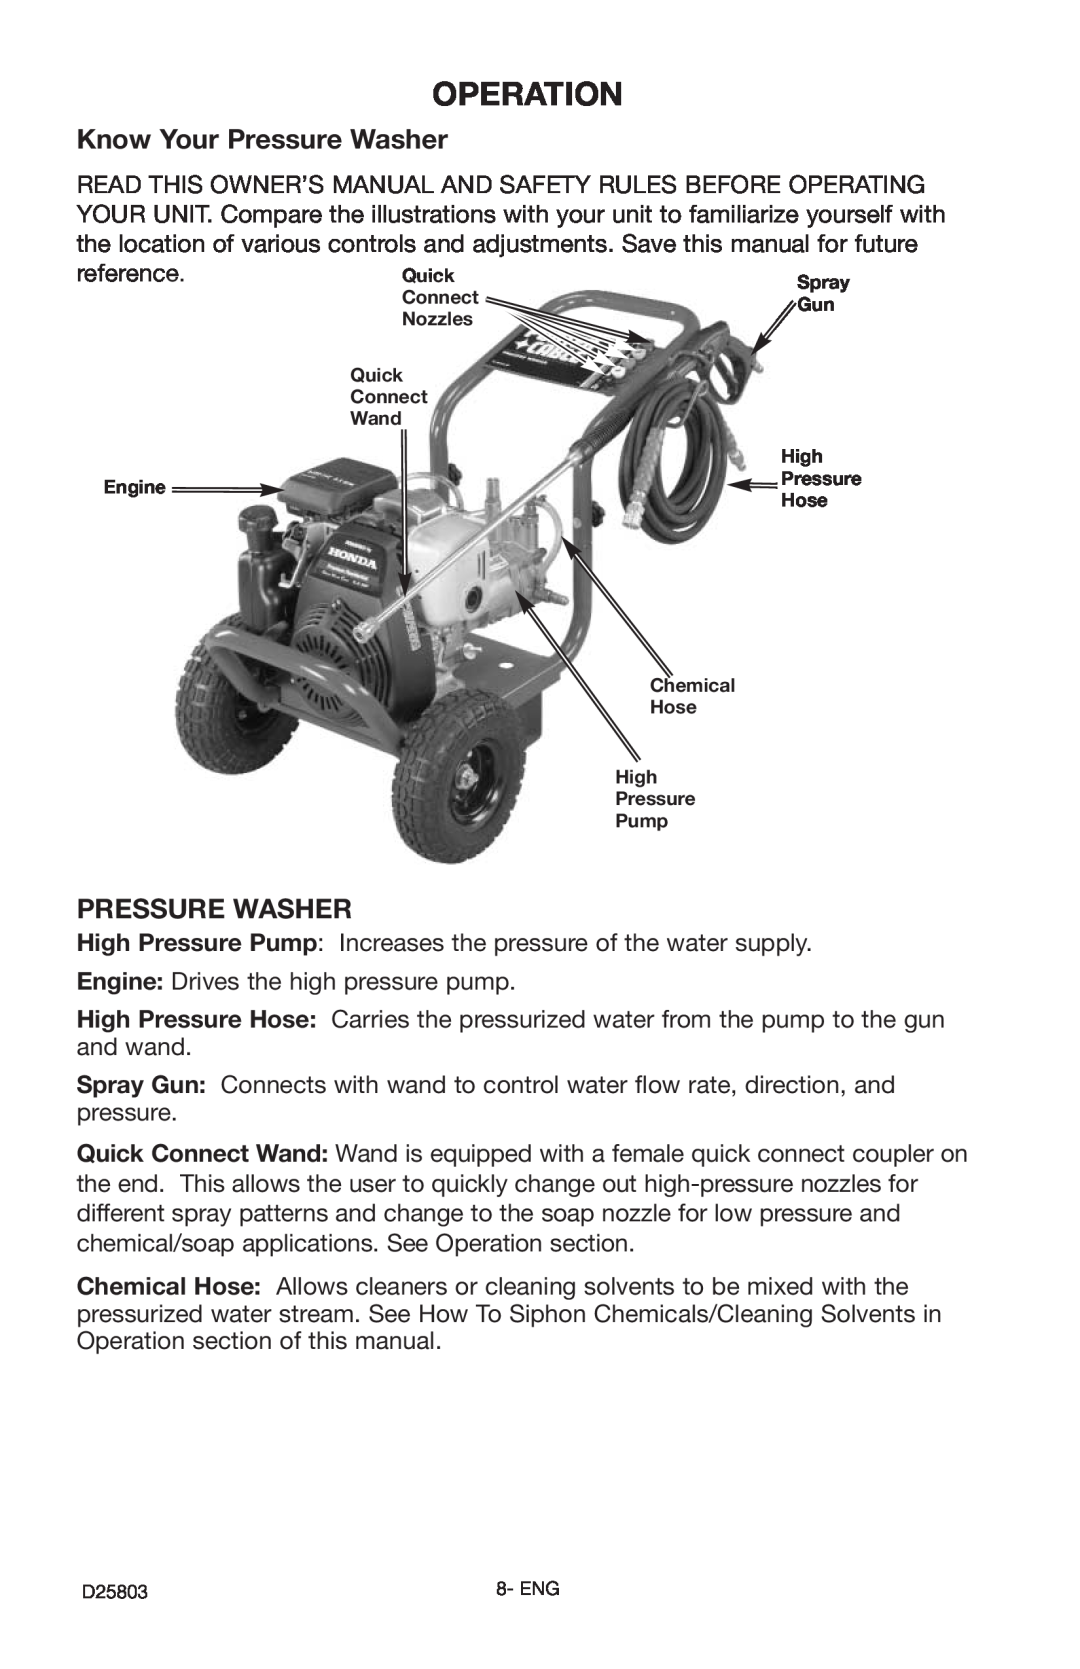 Porter-Cable PCH2401, D25803-025-1 instruction manual Operation, Know Your Pressure Washer 